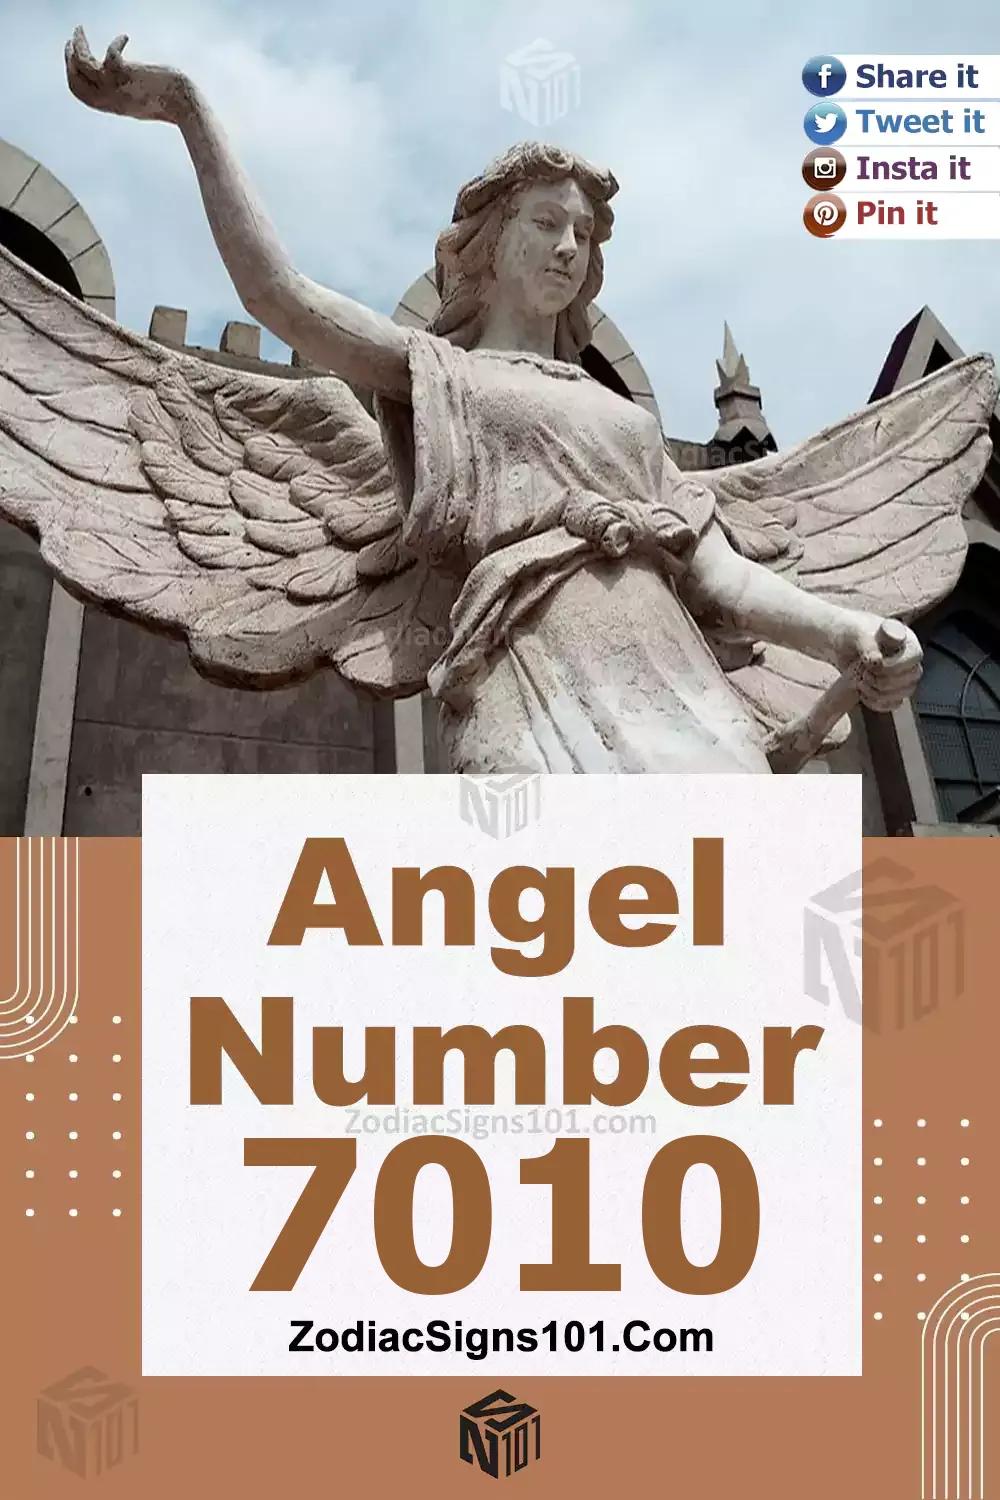 7010 Angel Number Meaning